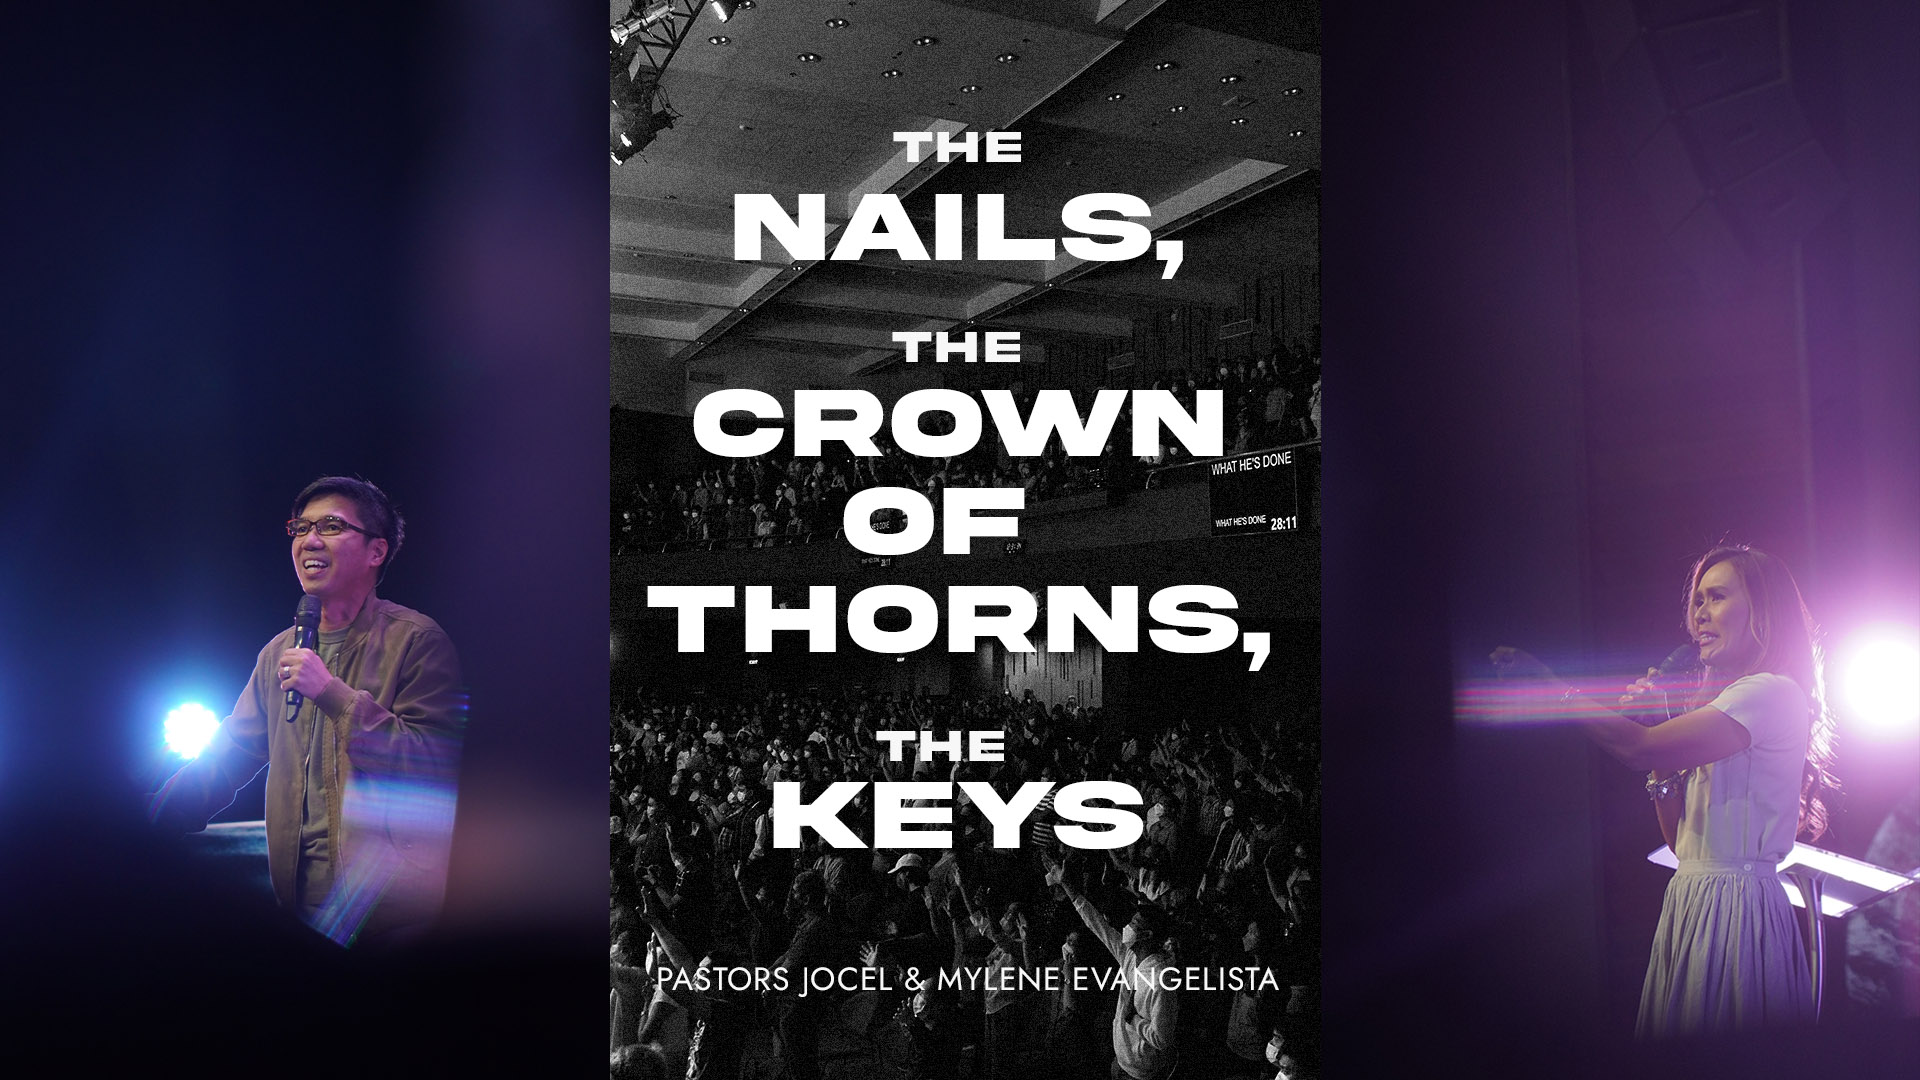 THE NAILS, THE CROWN OF THORNS, AND THE KEYS